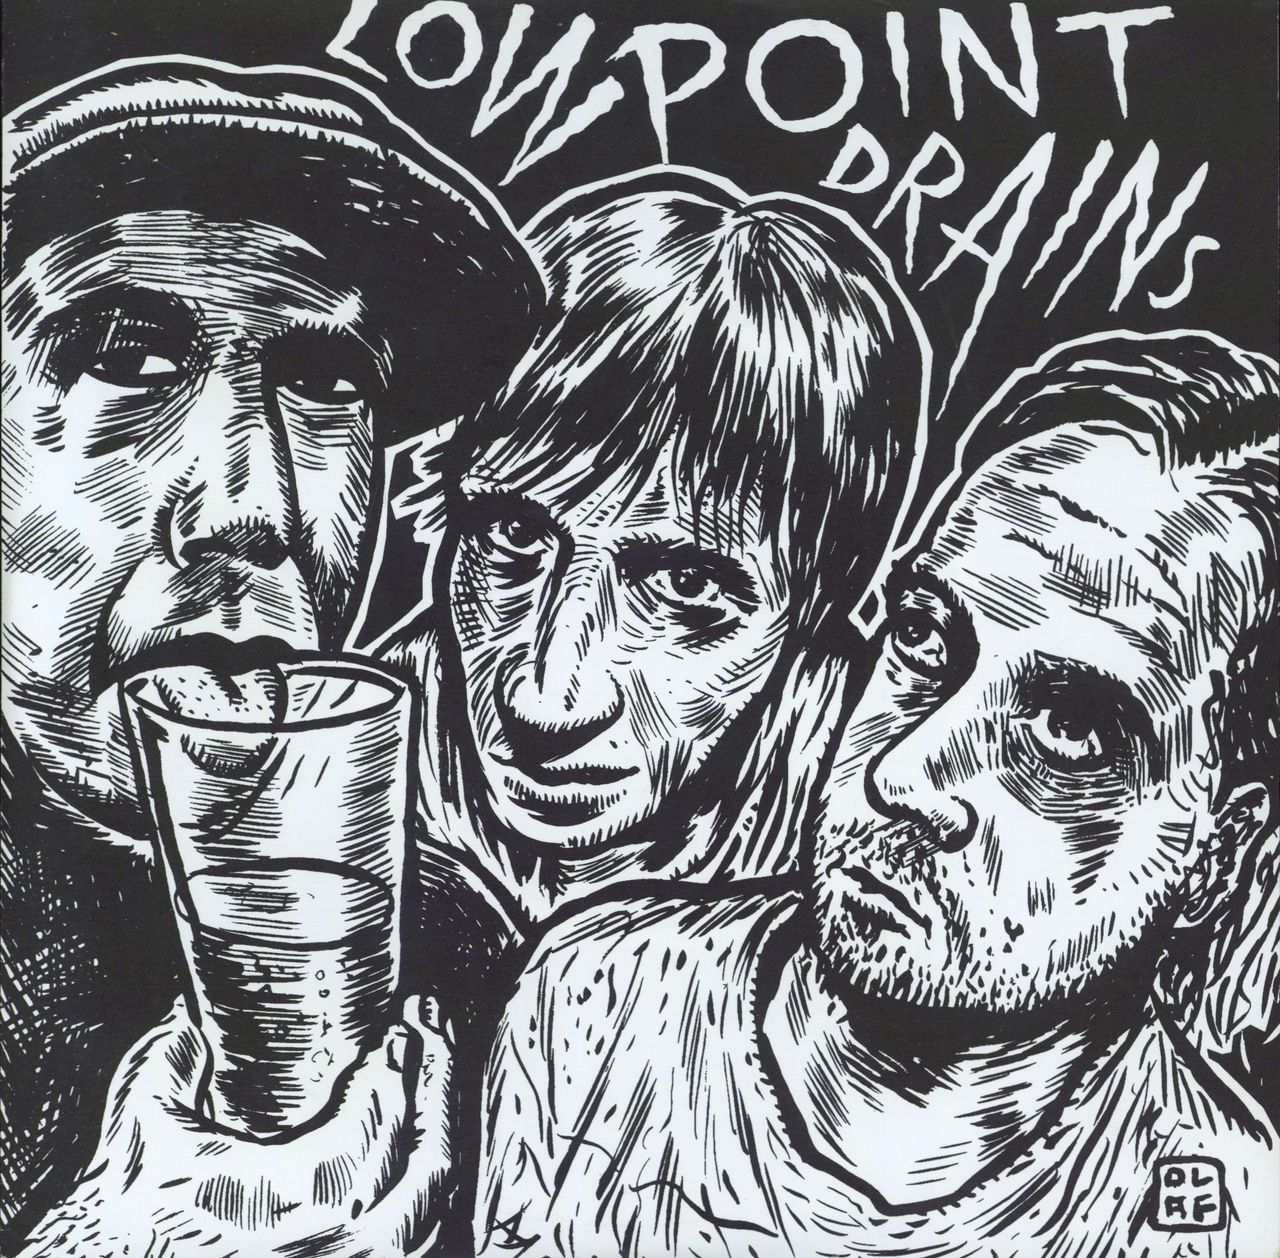 Low Point Drains Low Point Drains US 7" vinyl single (7 inch record / 45) 702-165